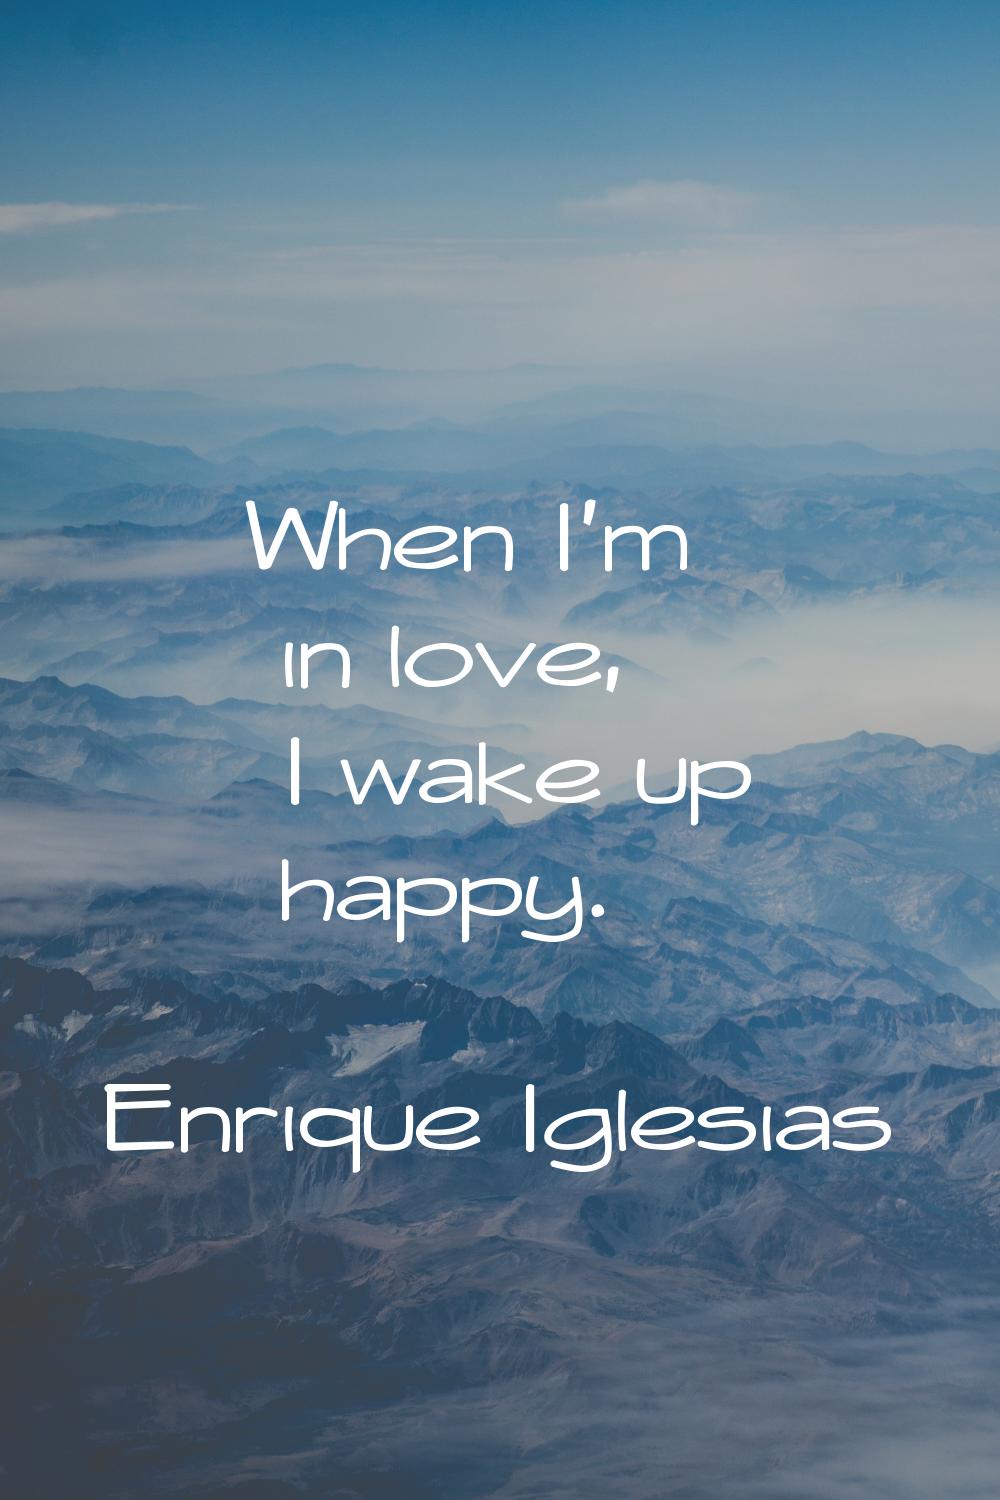 When I'm in love, I wake up happy.